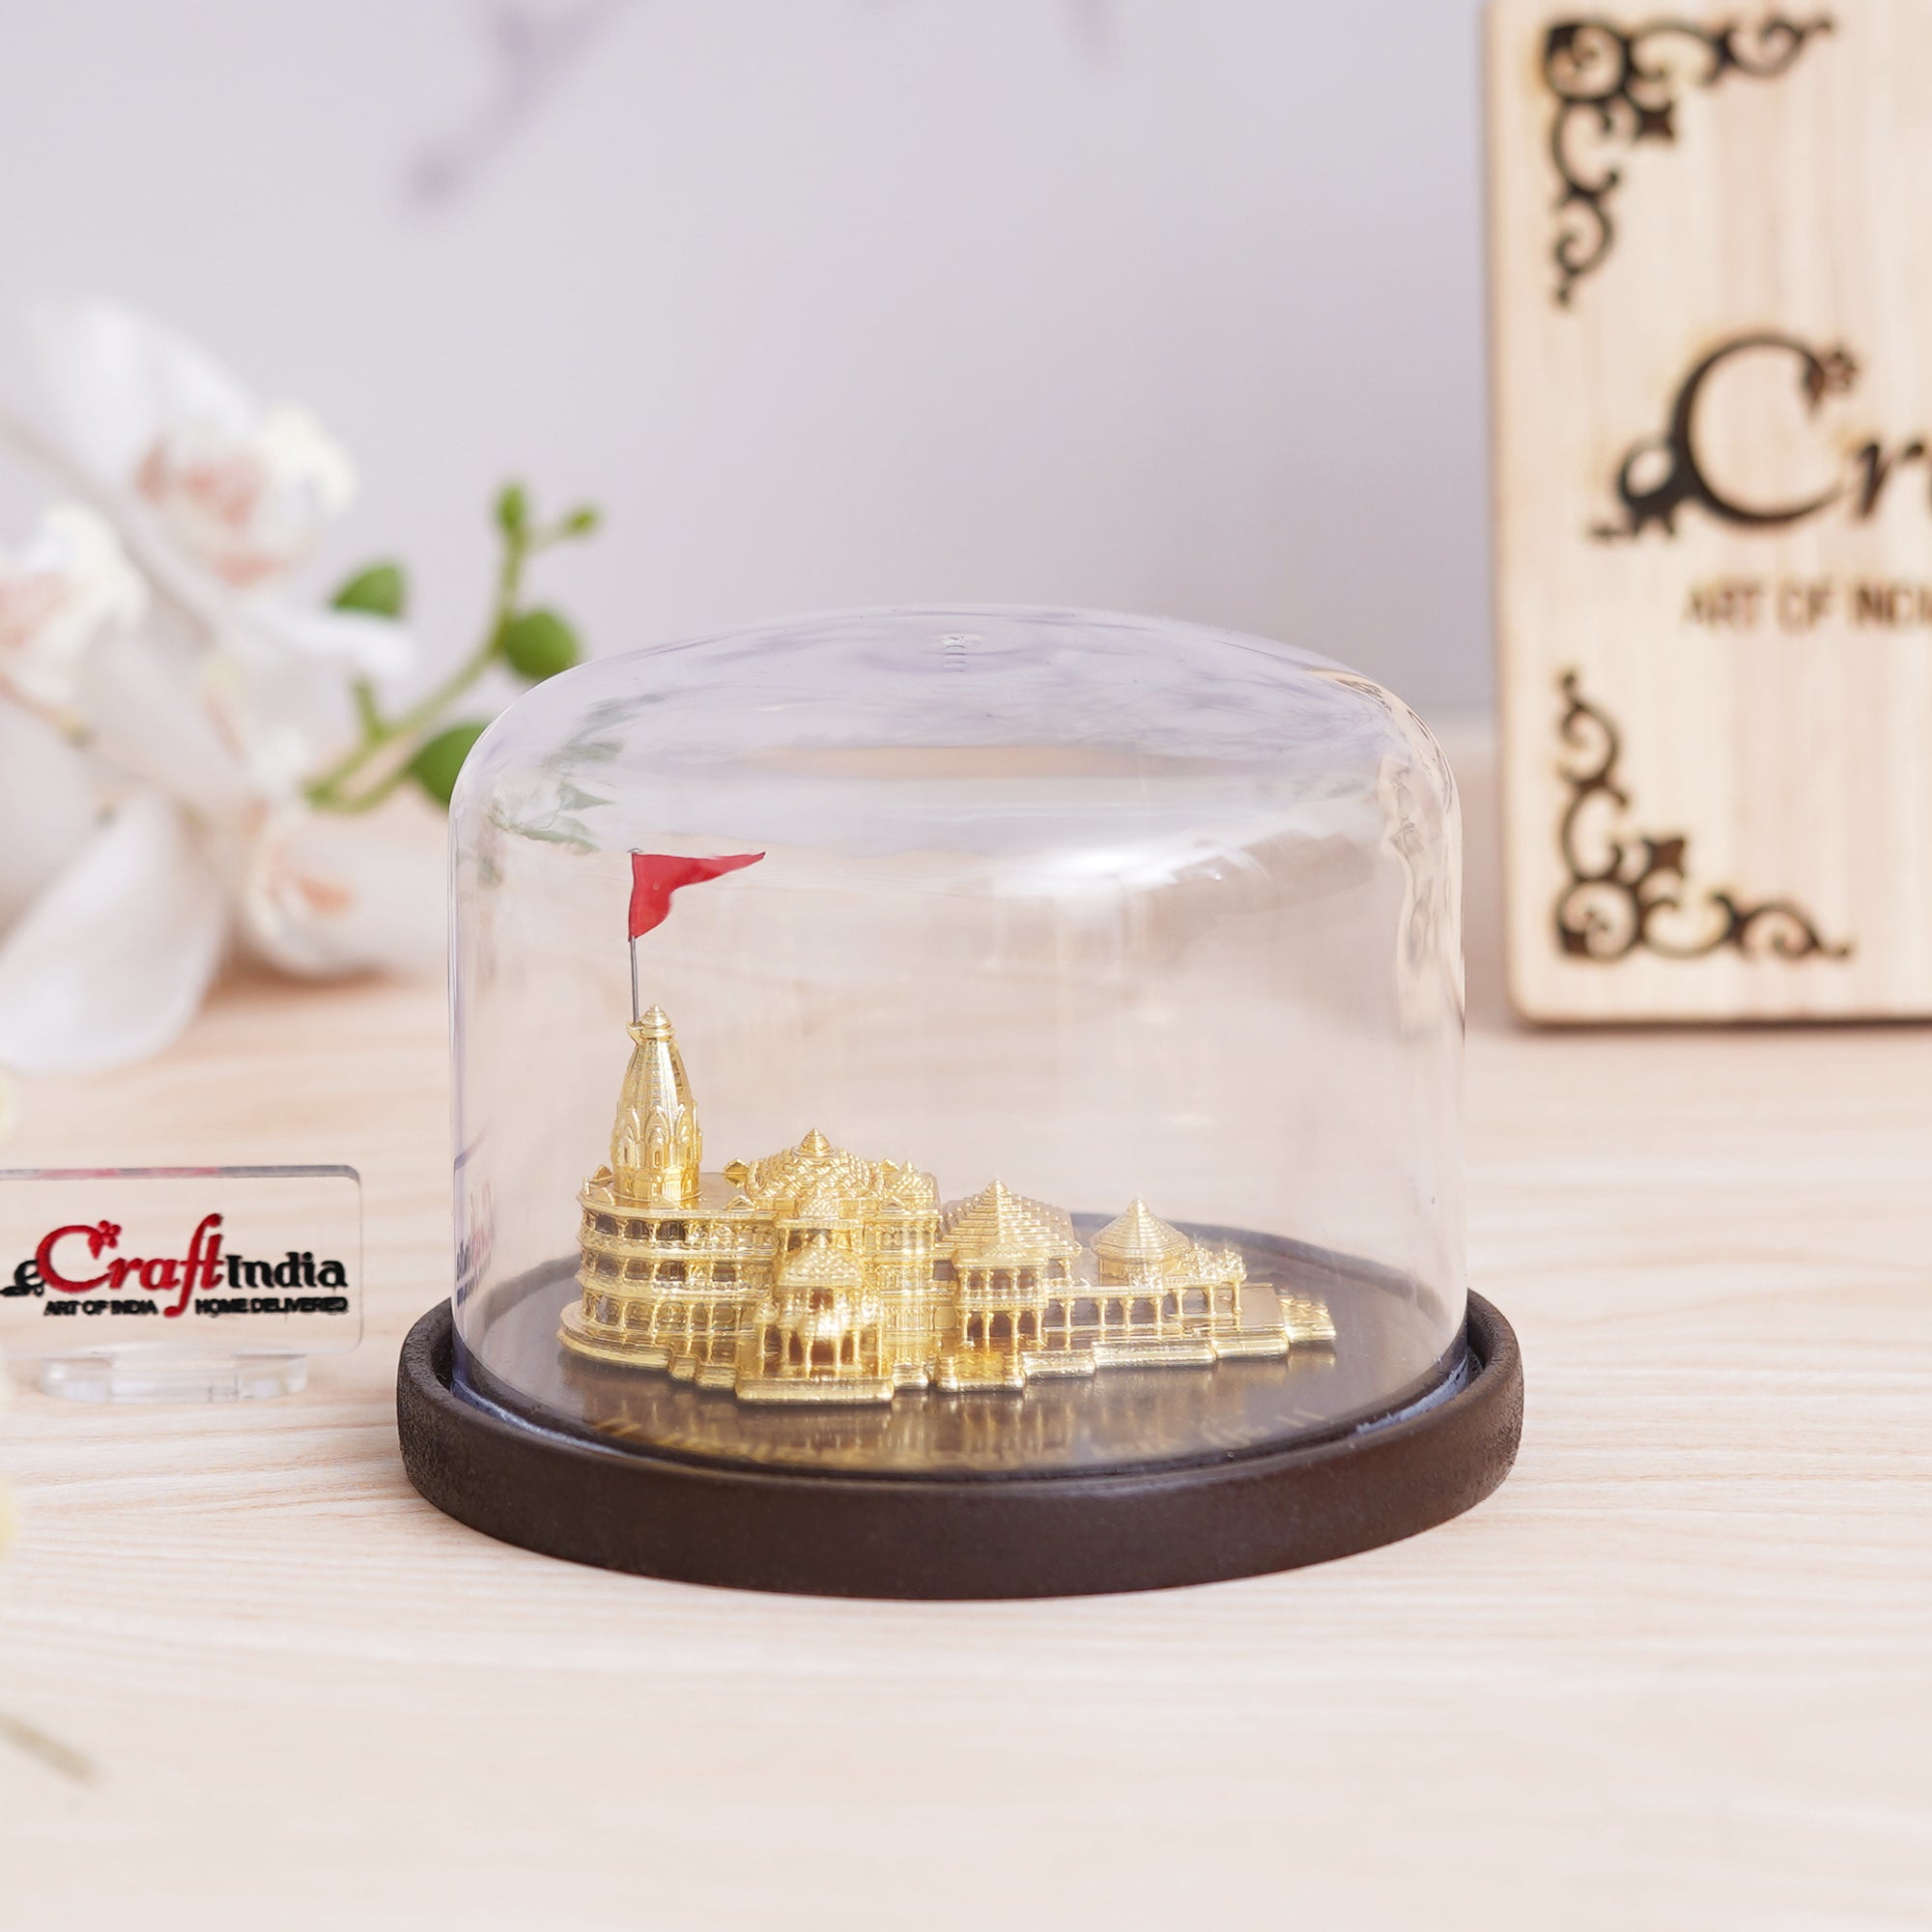 eCraftIndia Golden Shri Ram Mandir Ayodhya Model Authentic Designer Temple Covered by a Glass Dome - Perfect for Home Decor, and Spiritual Gifting